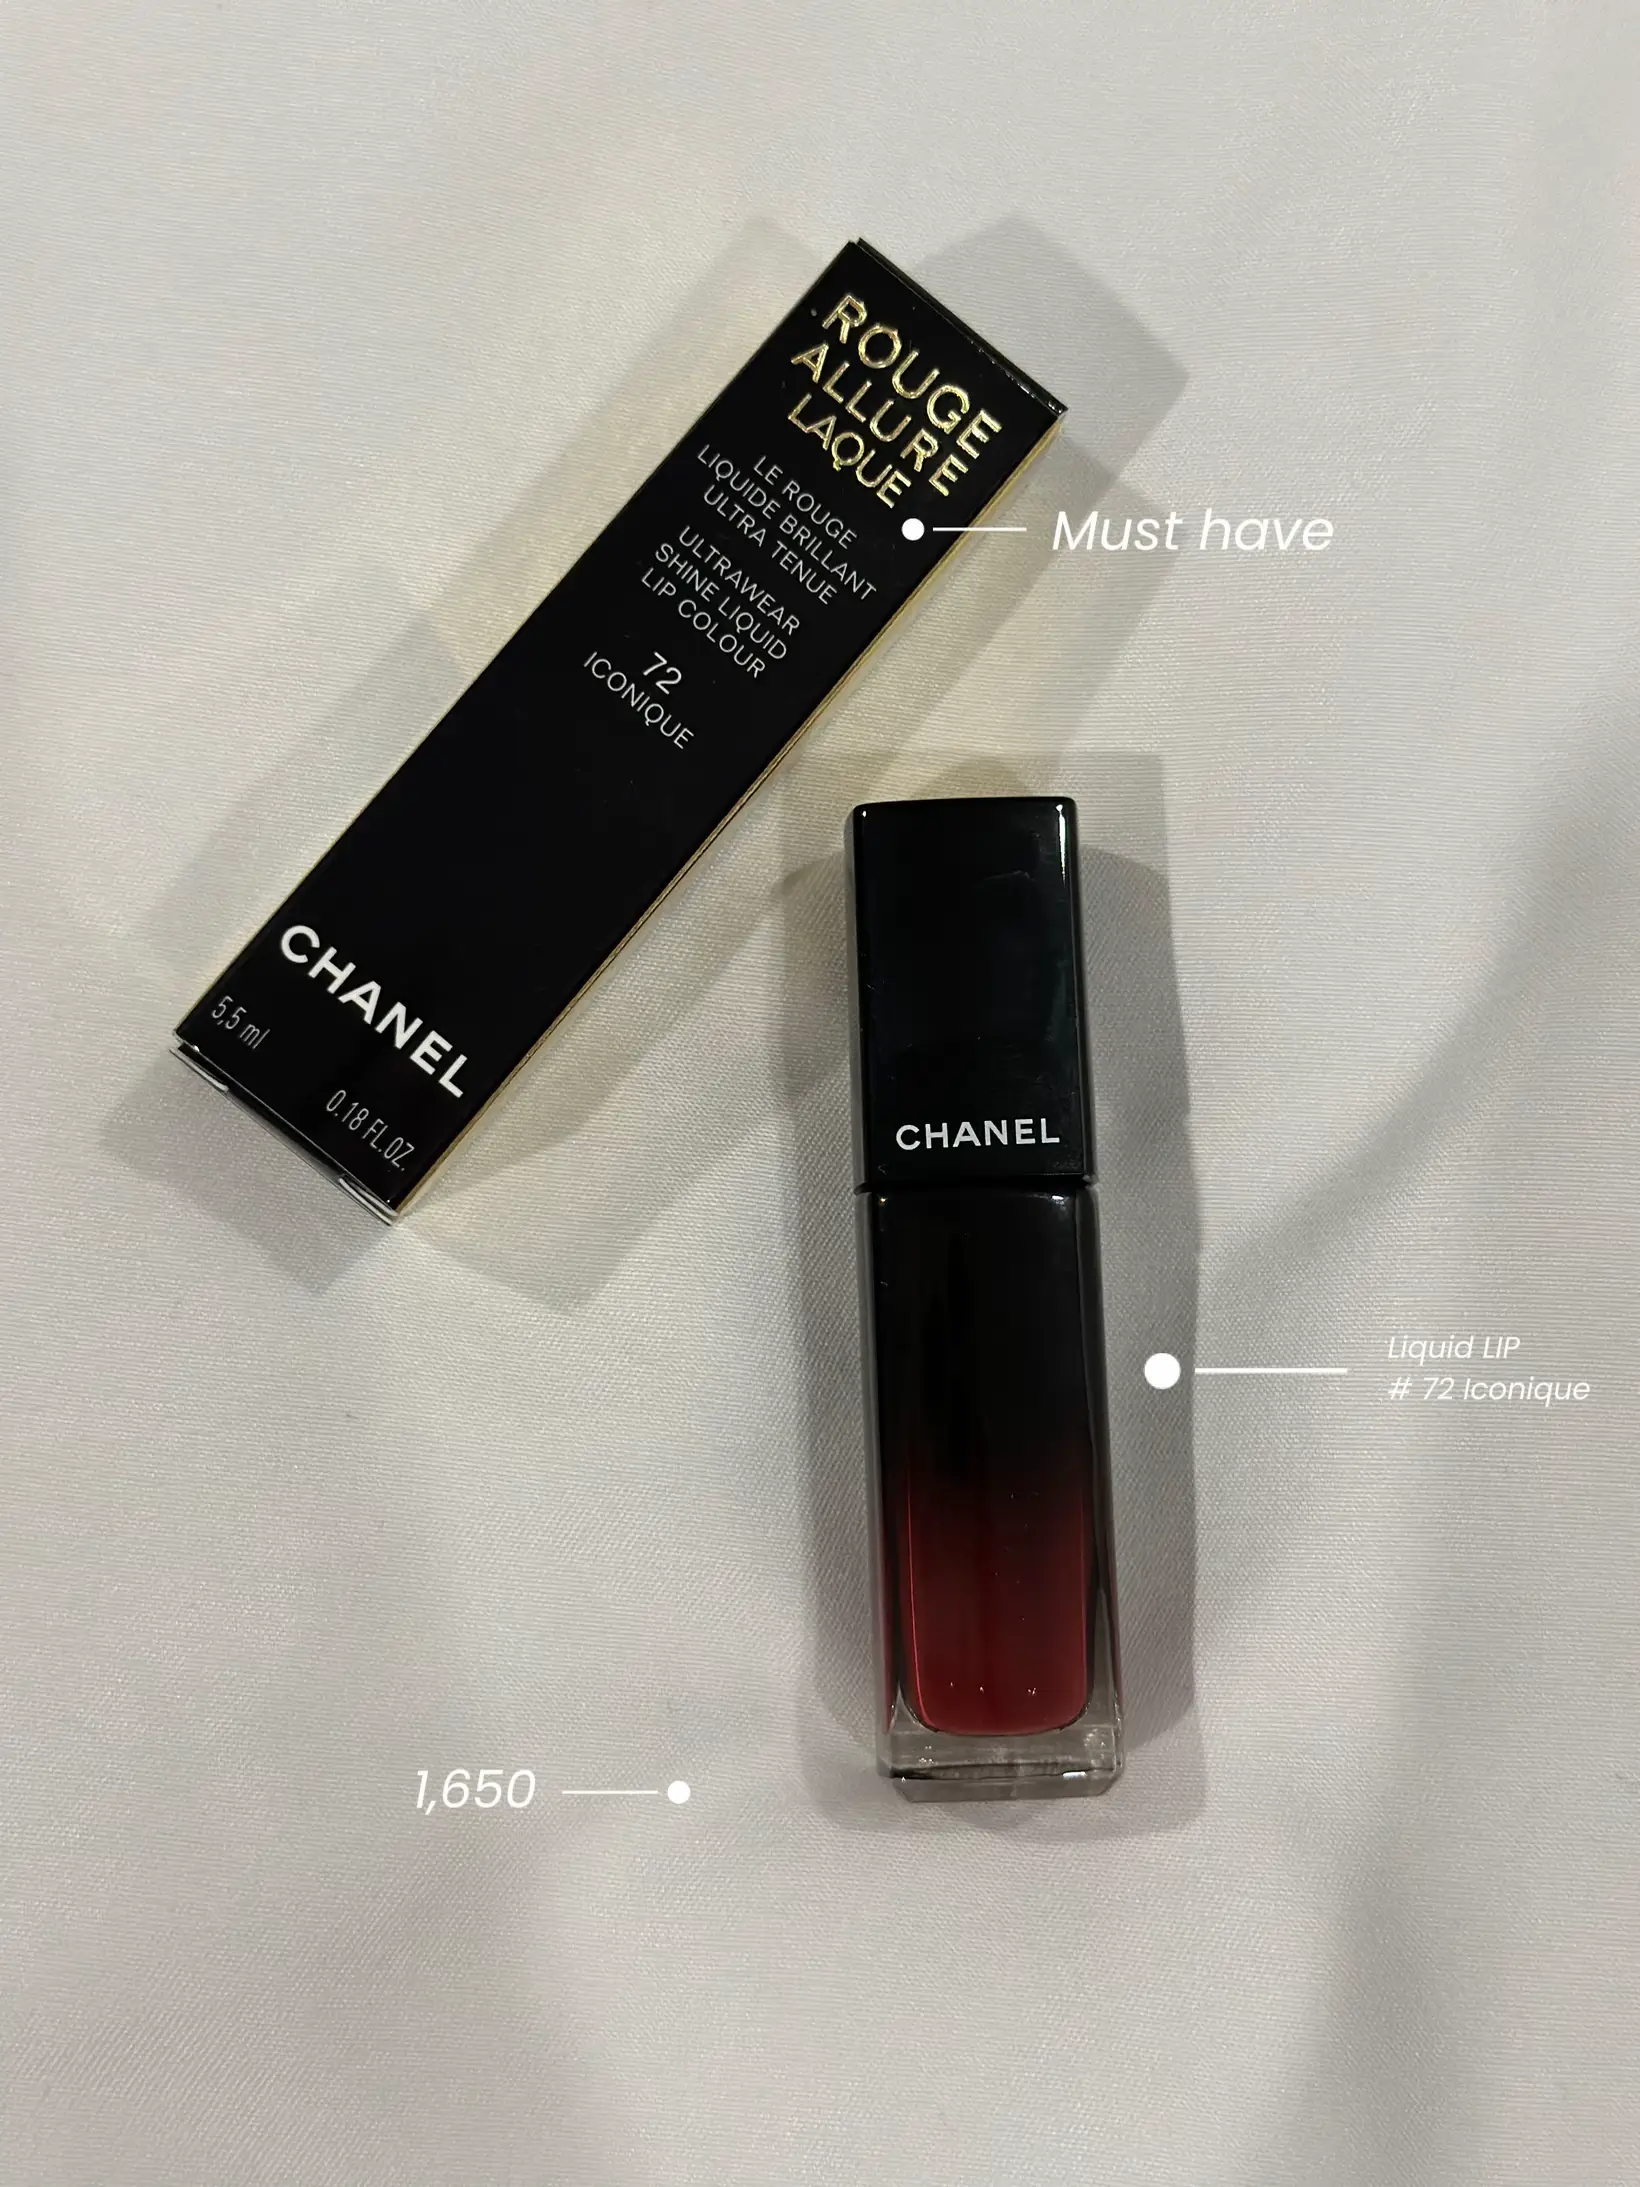 The drug label, lip Chanel, the color of the body should have